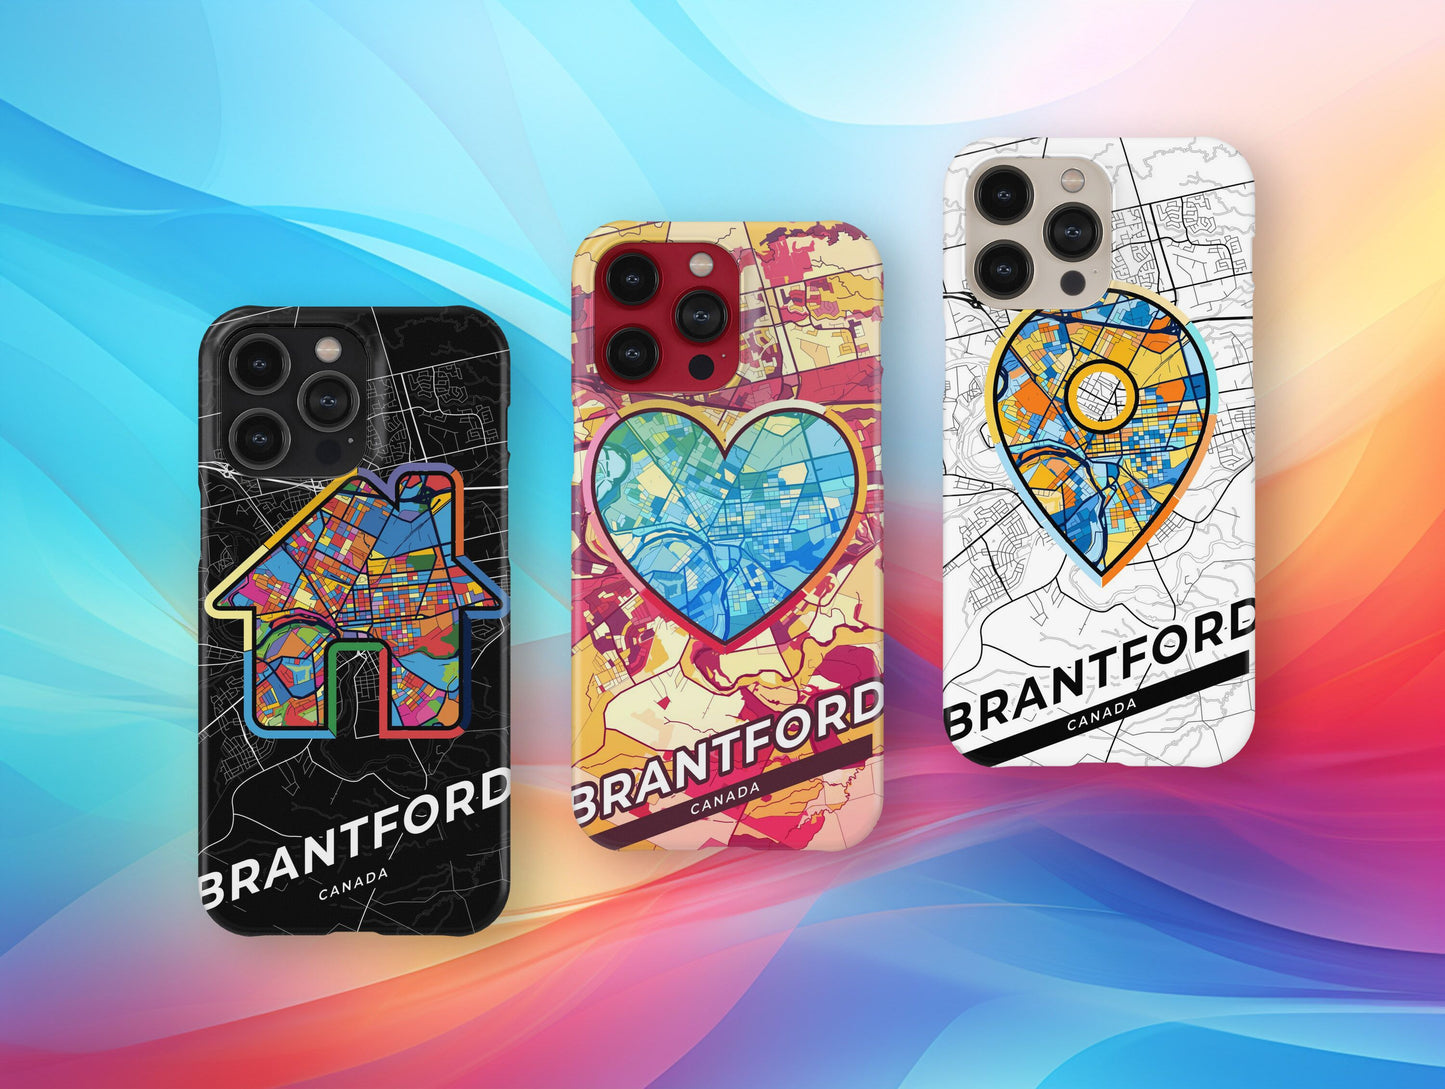 Brantford Canada slim phone case with colorful icon. Birthday, wedding or housewarming gift. Couple match cases.